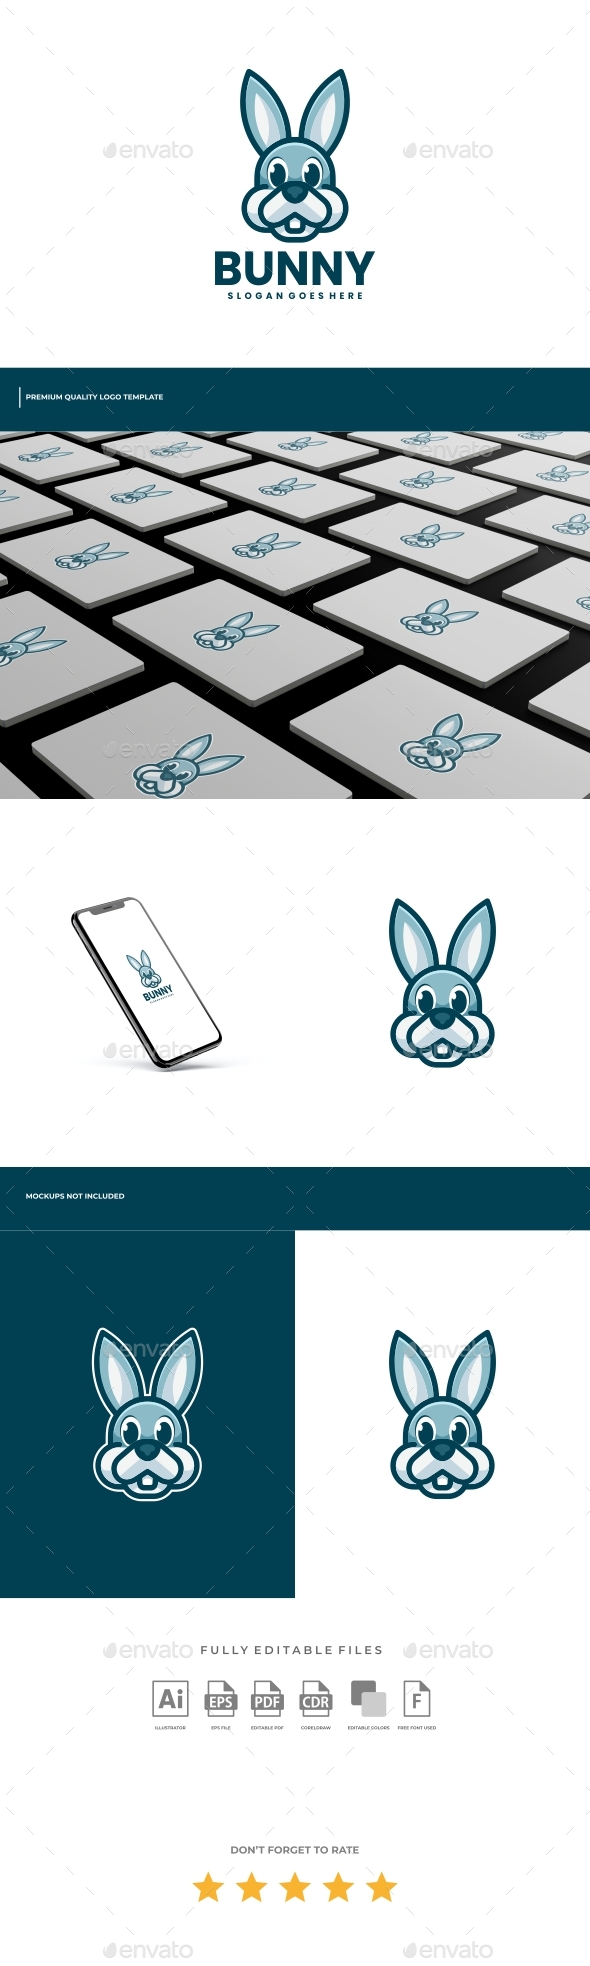 [DOWNLOAD]Bunny Logo Template